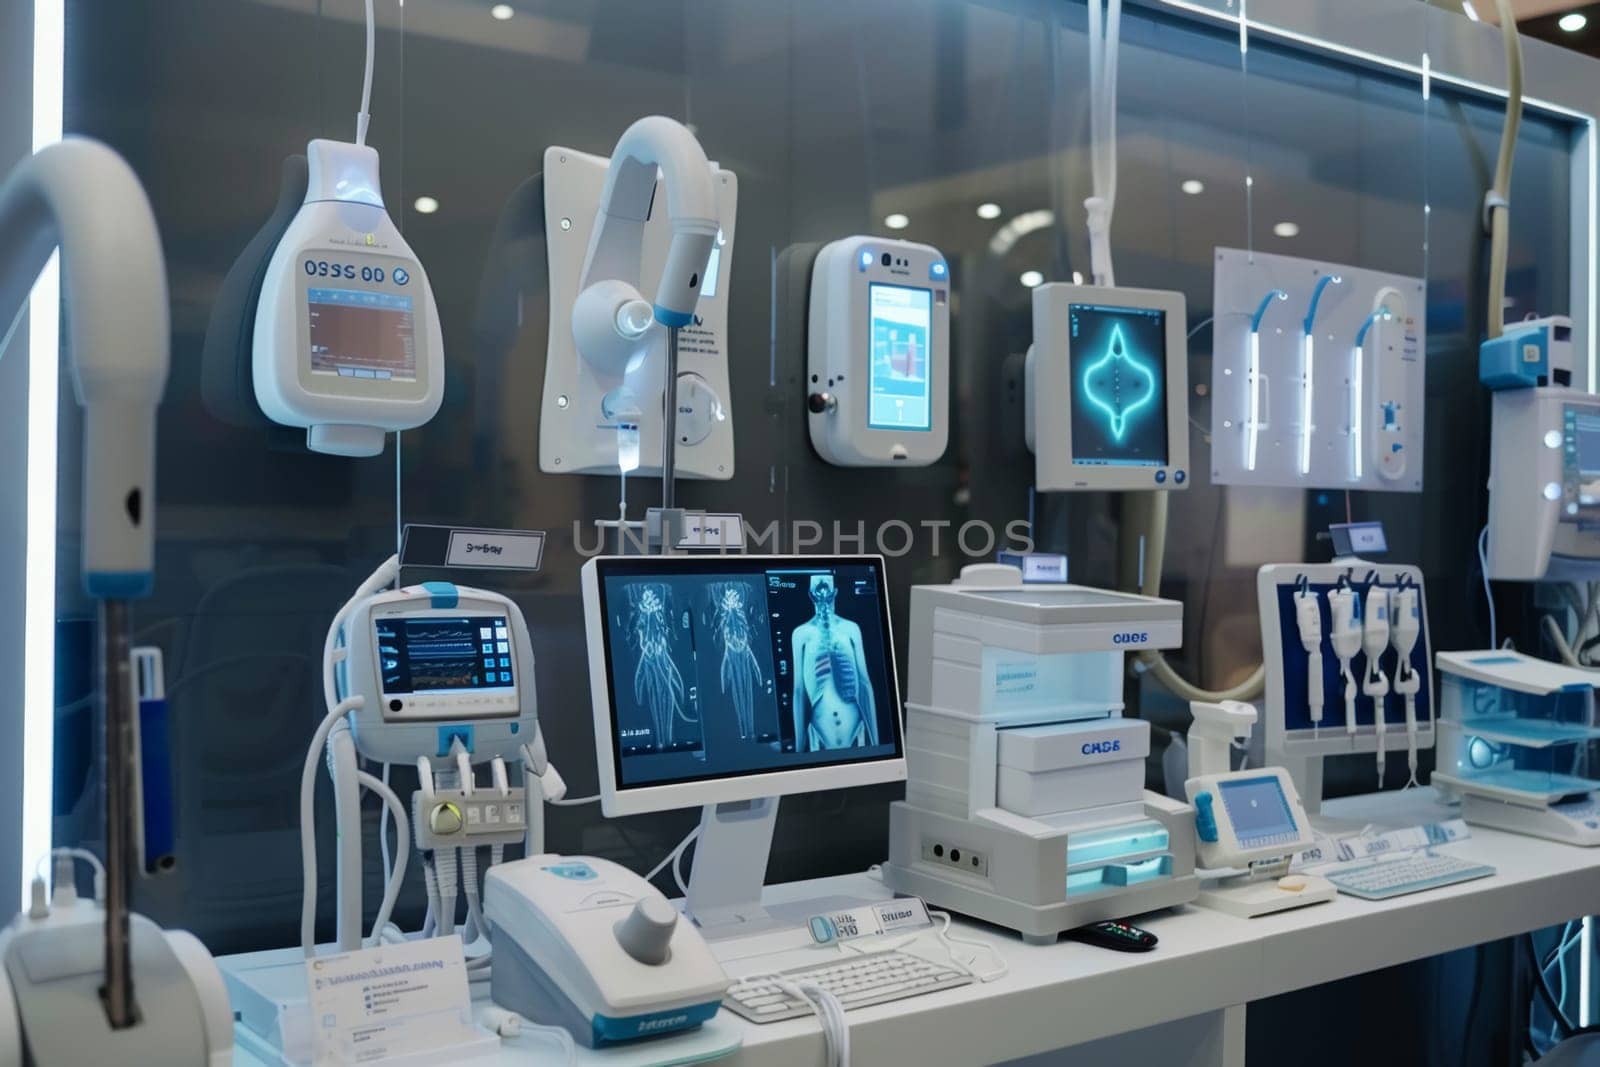 Advanced Medical Equipment Display at Expo by andreyz